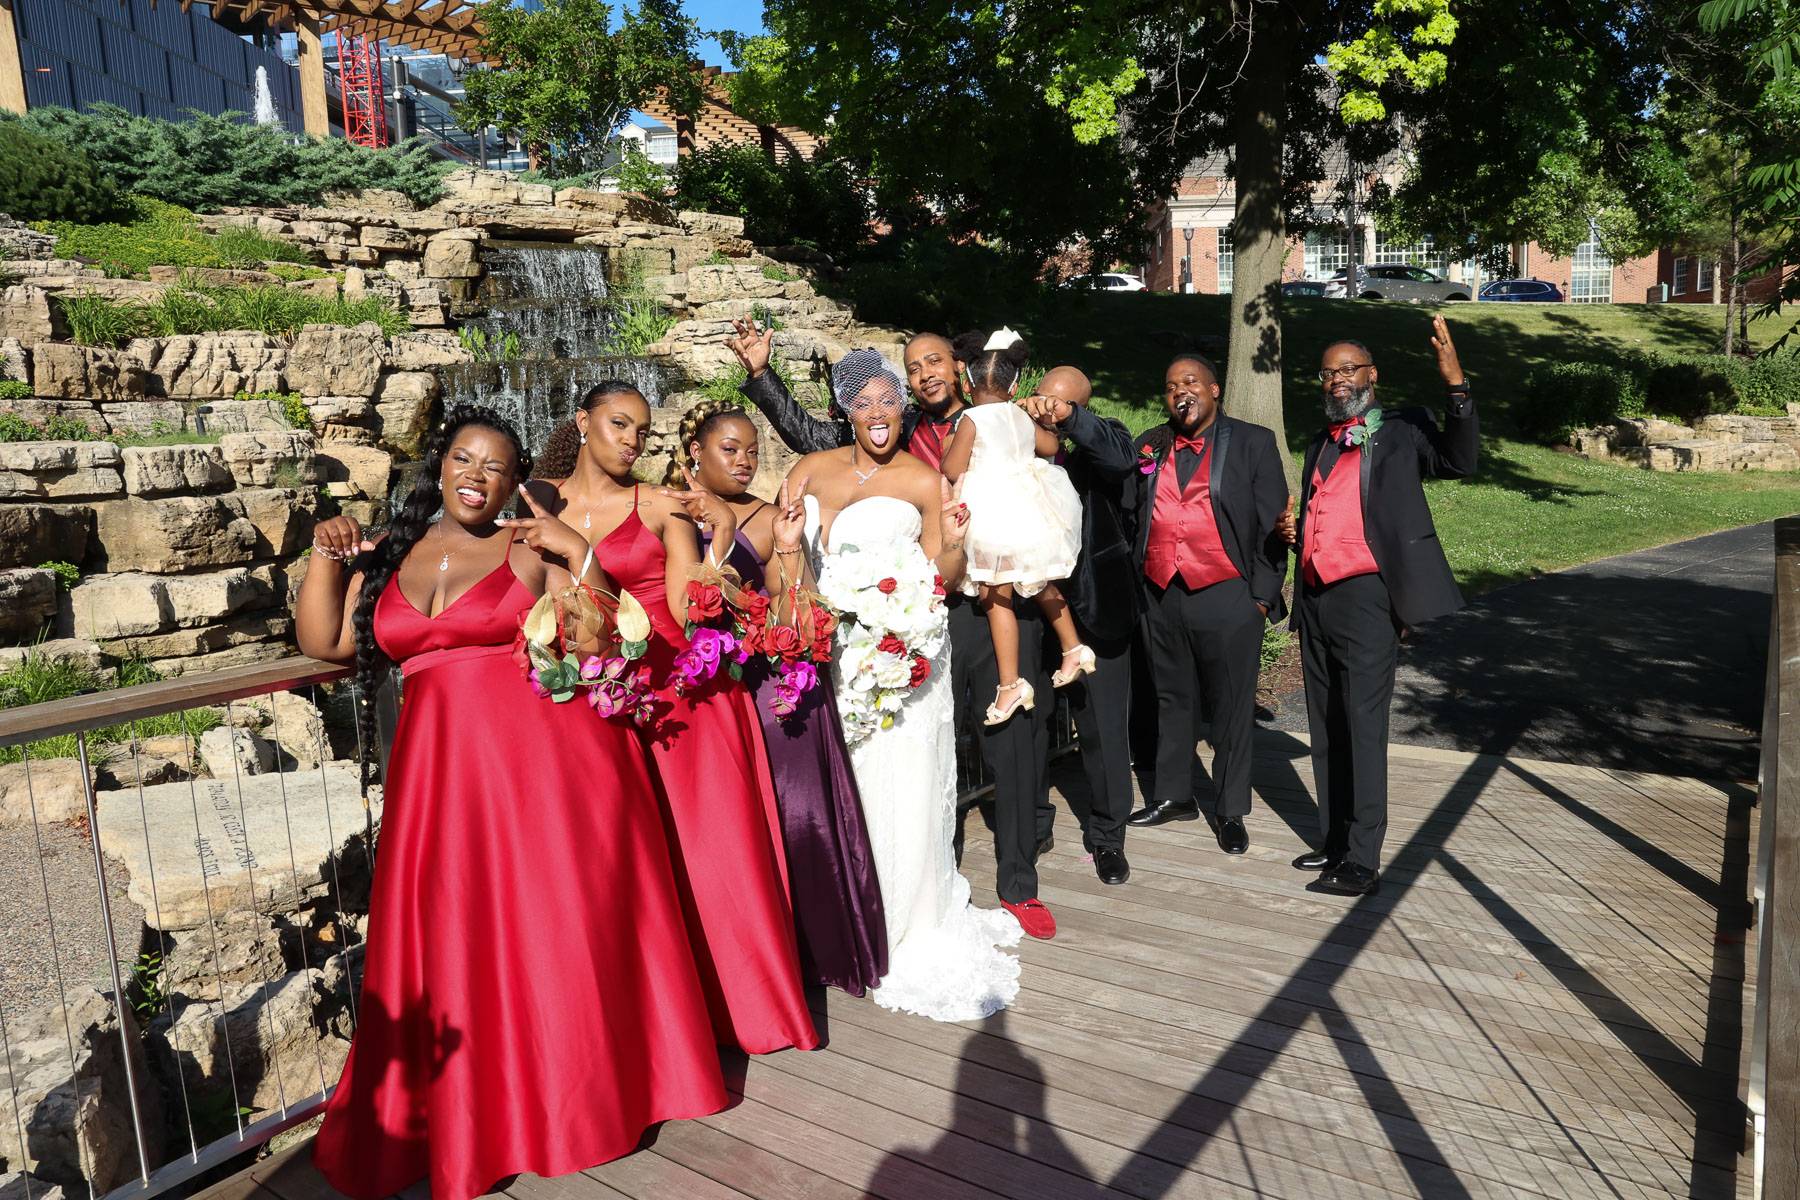 The newlyweds and attendants in cool poses